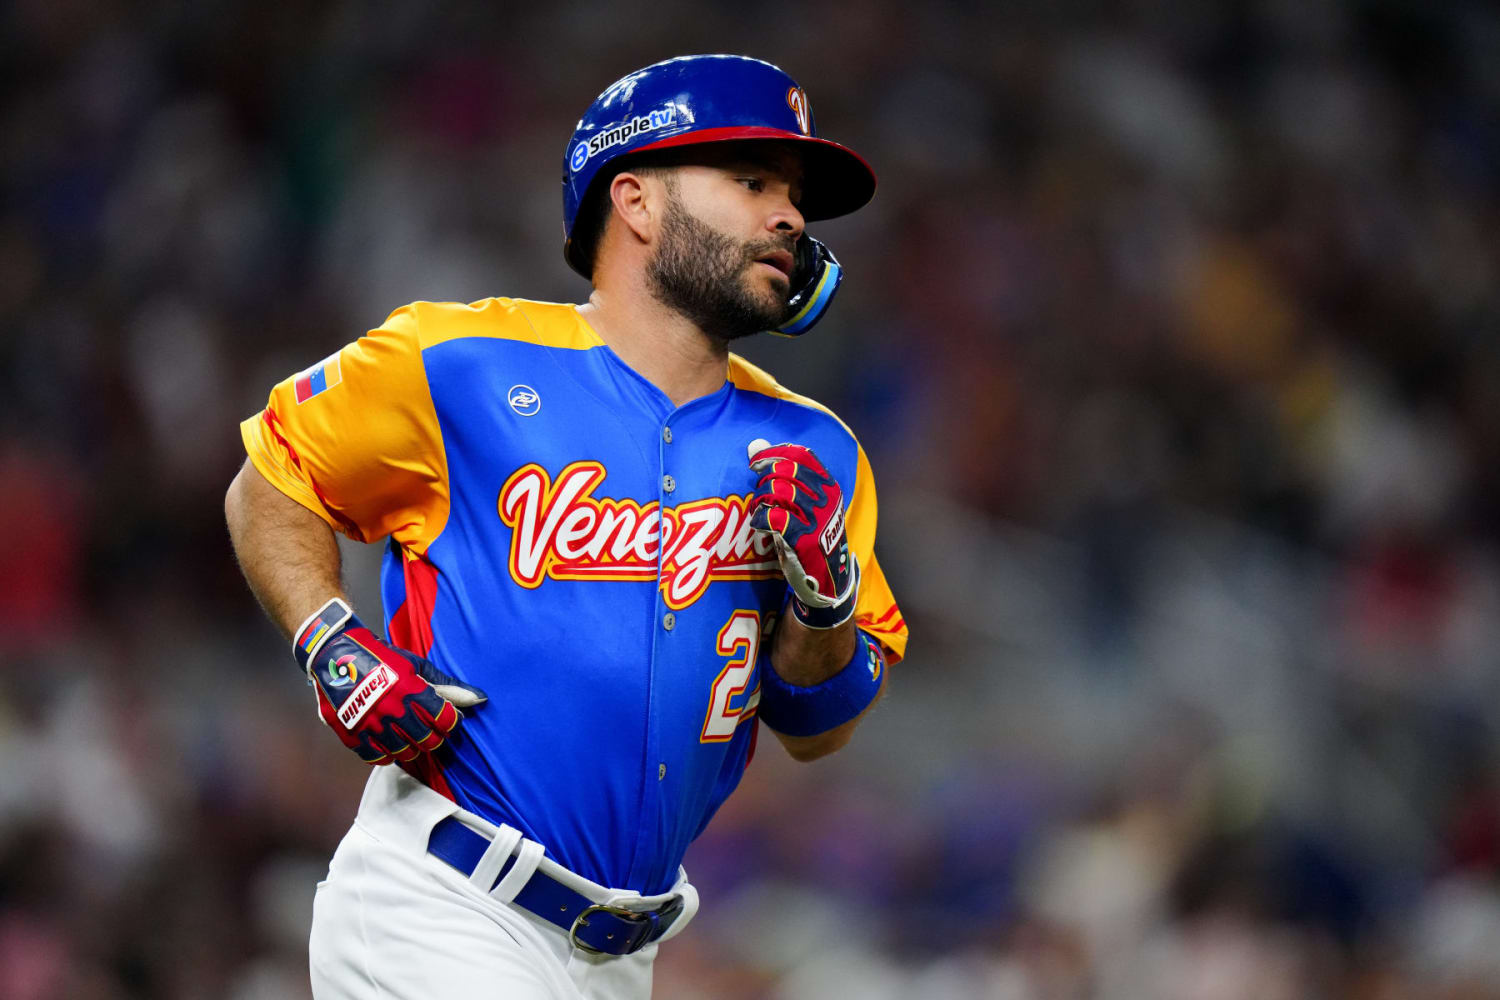 Nike unveils new MLB jerseys for 2020, by Rowan Kavner